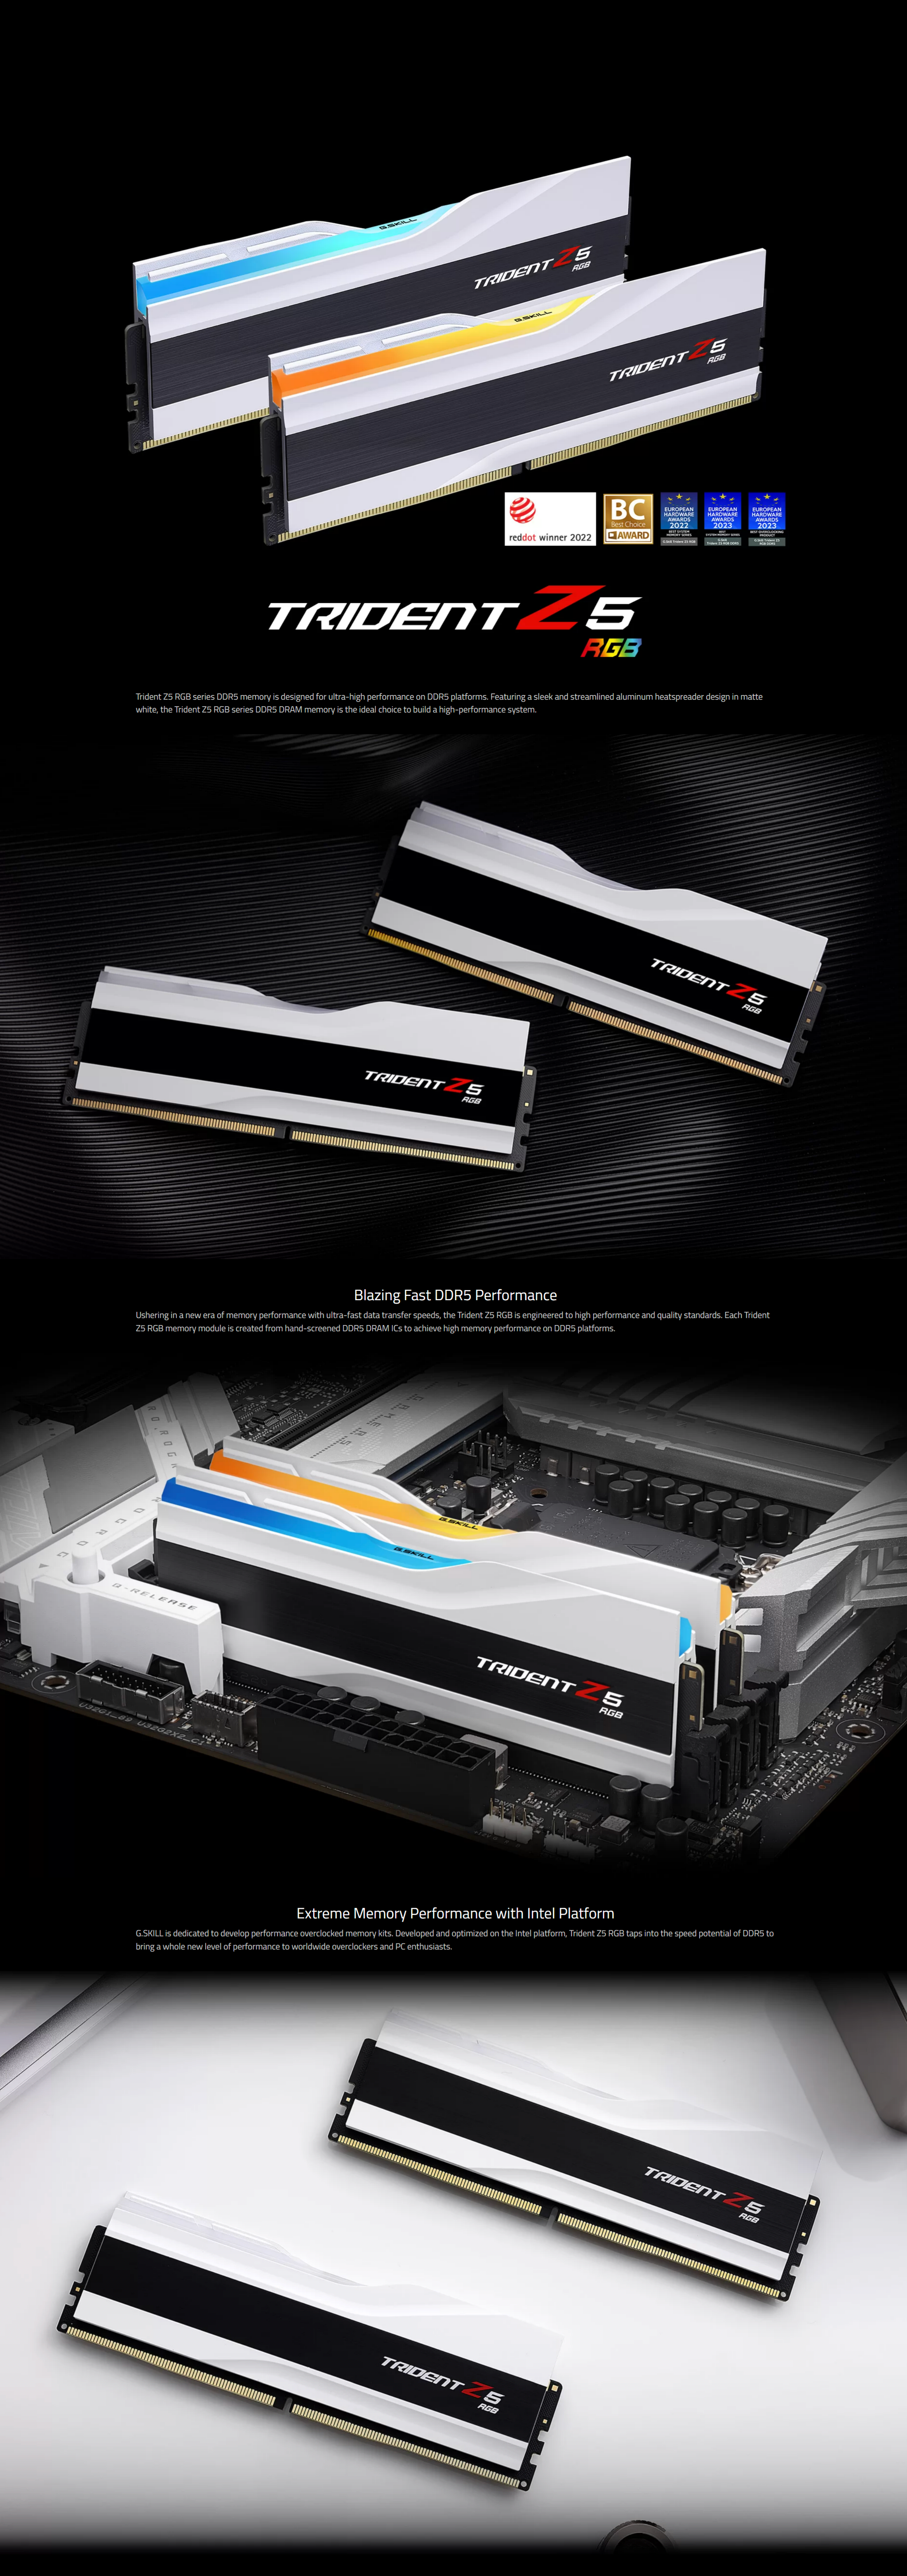 A large marketing image providing additional information about the product G.Skill 48GB Kit (2x 24GB) DDR5 Trident Z5 RGB CL40 8200MHz- Black - Additional alt info not provided